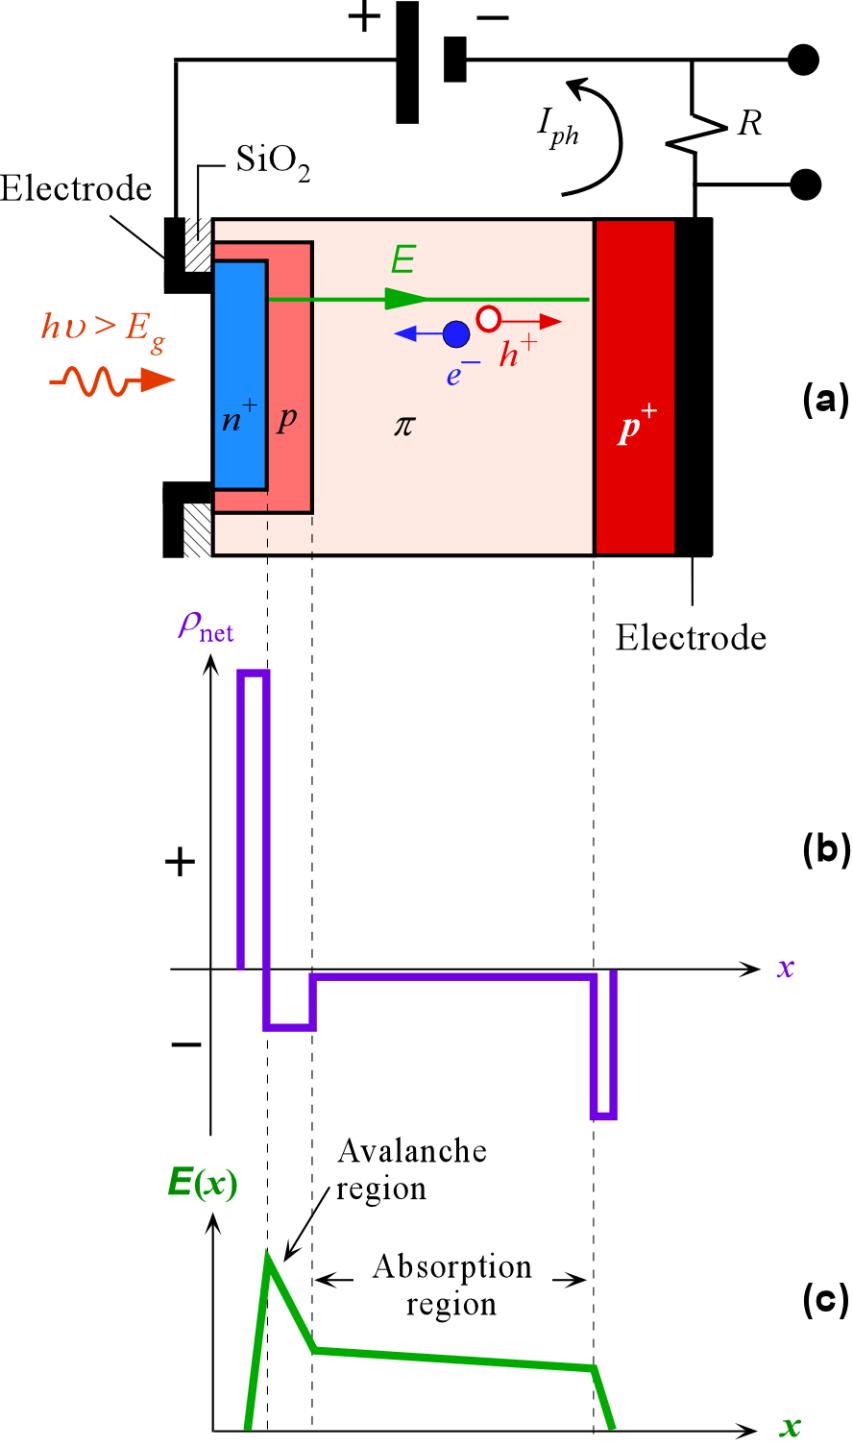 Avalanche Photodiode (a) A schematic illustration of the structure of an avalanche photodiode (APD) biased for avalanche gain.